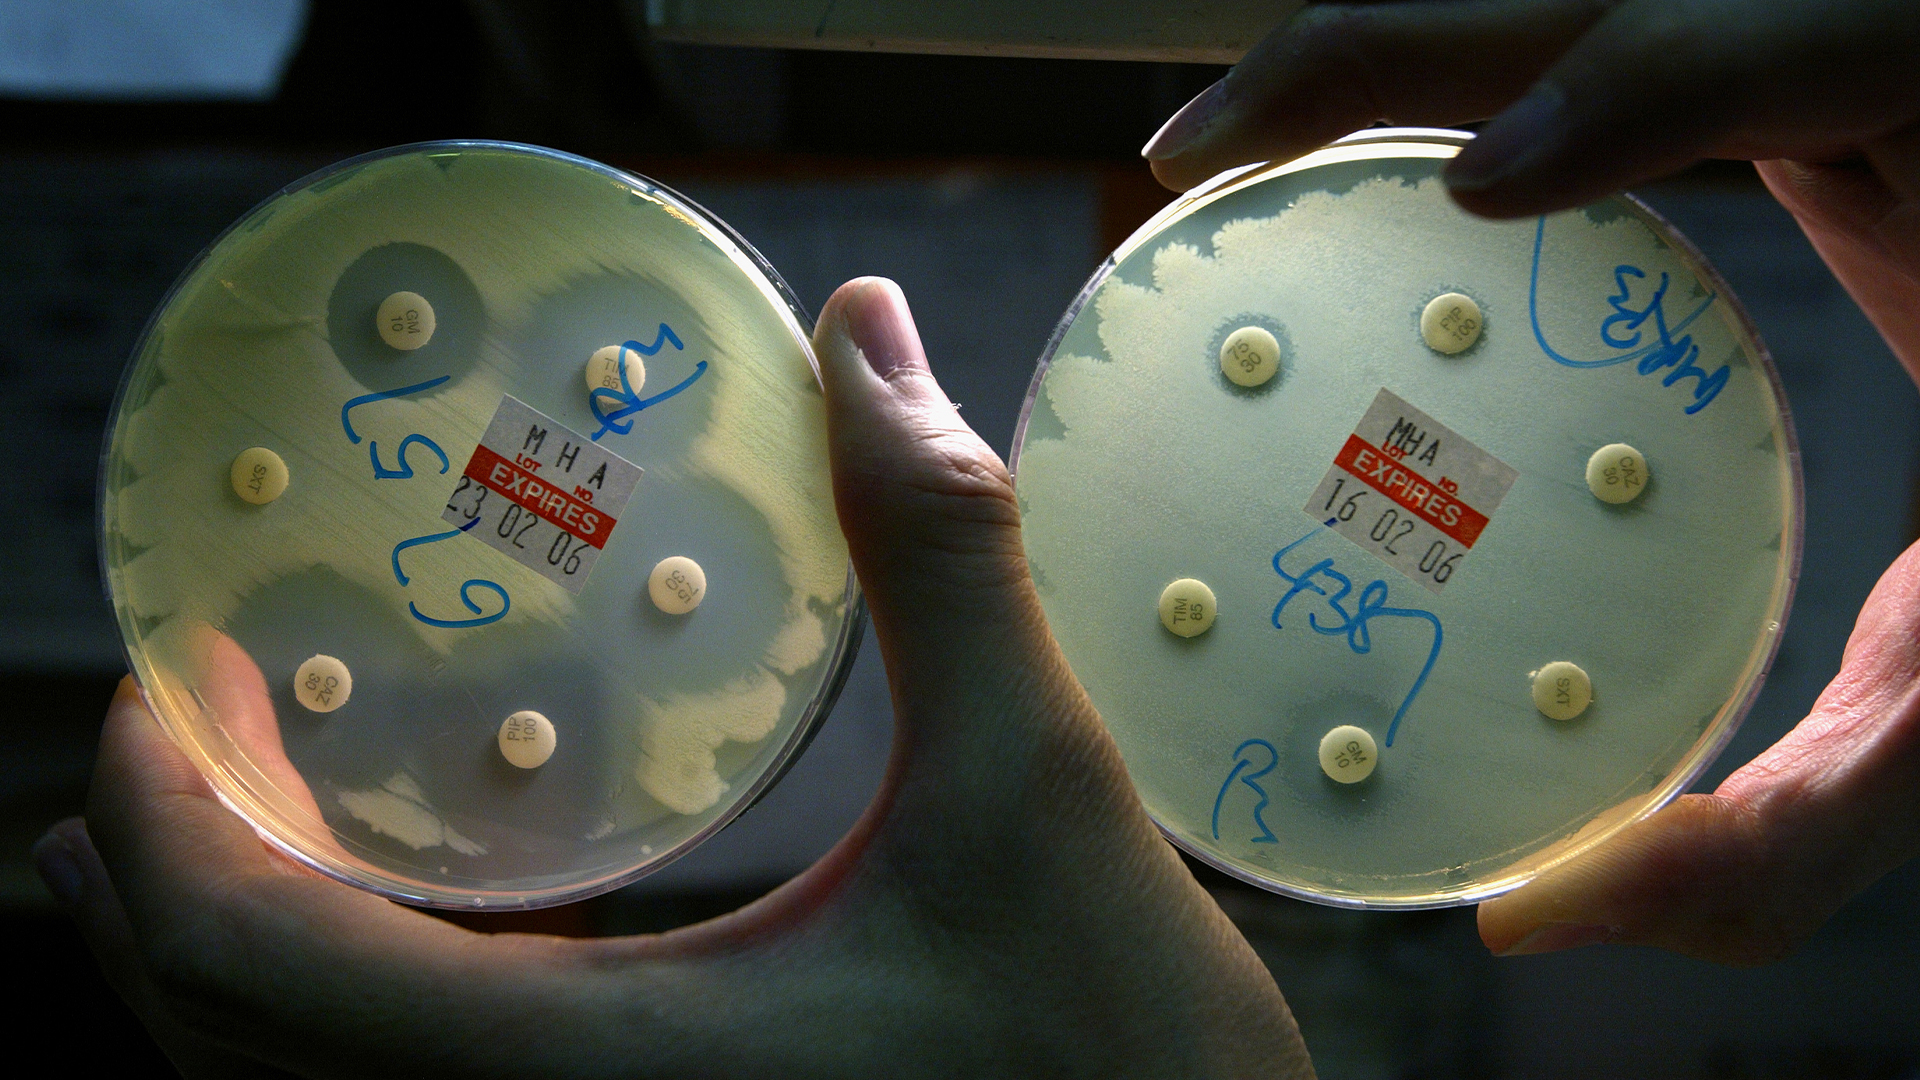 Superbugs are on the rise. How